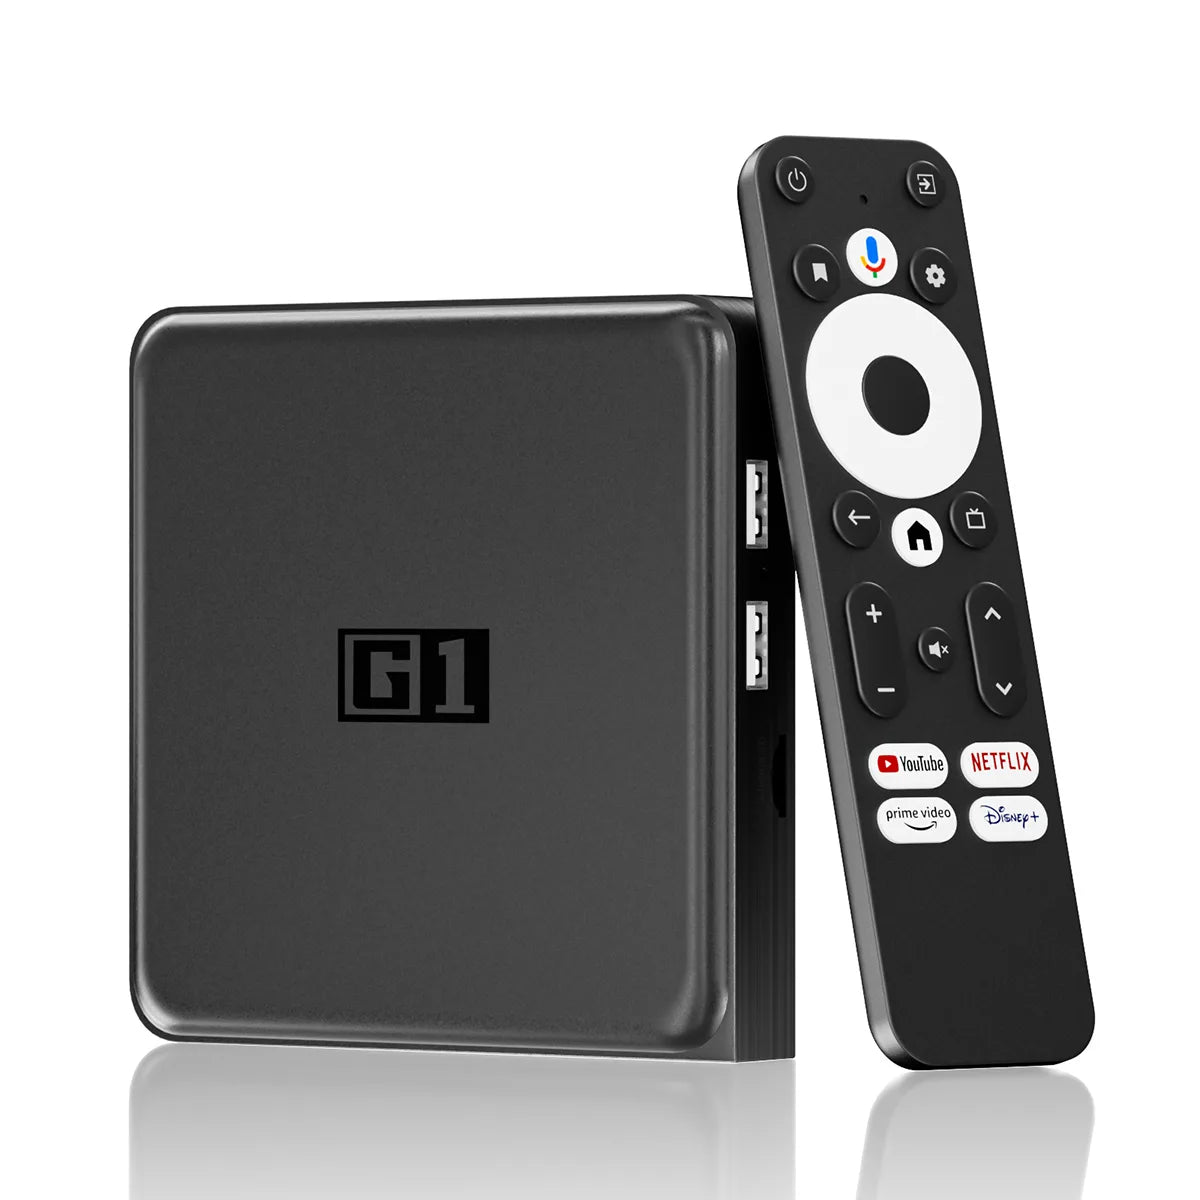 Kinahnk G1 Smart Box Android TV 11 OS Streaming Media Player